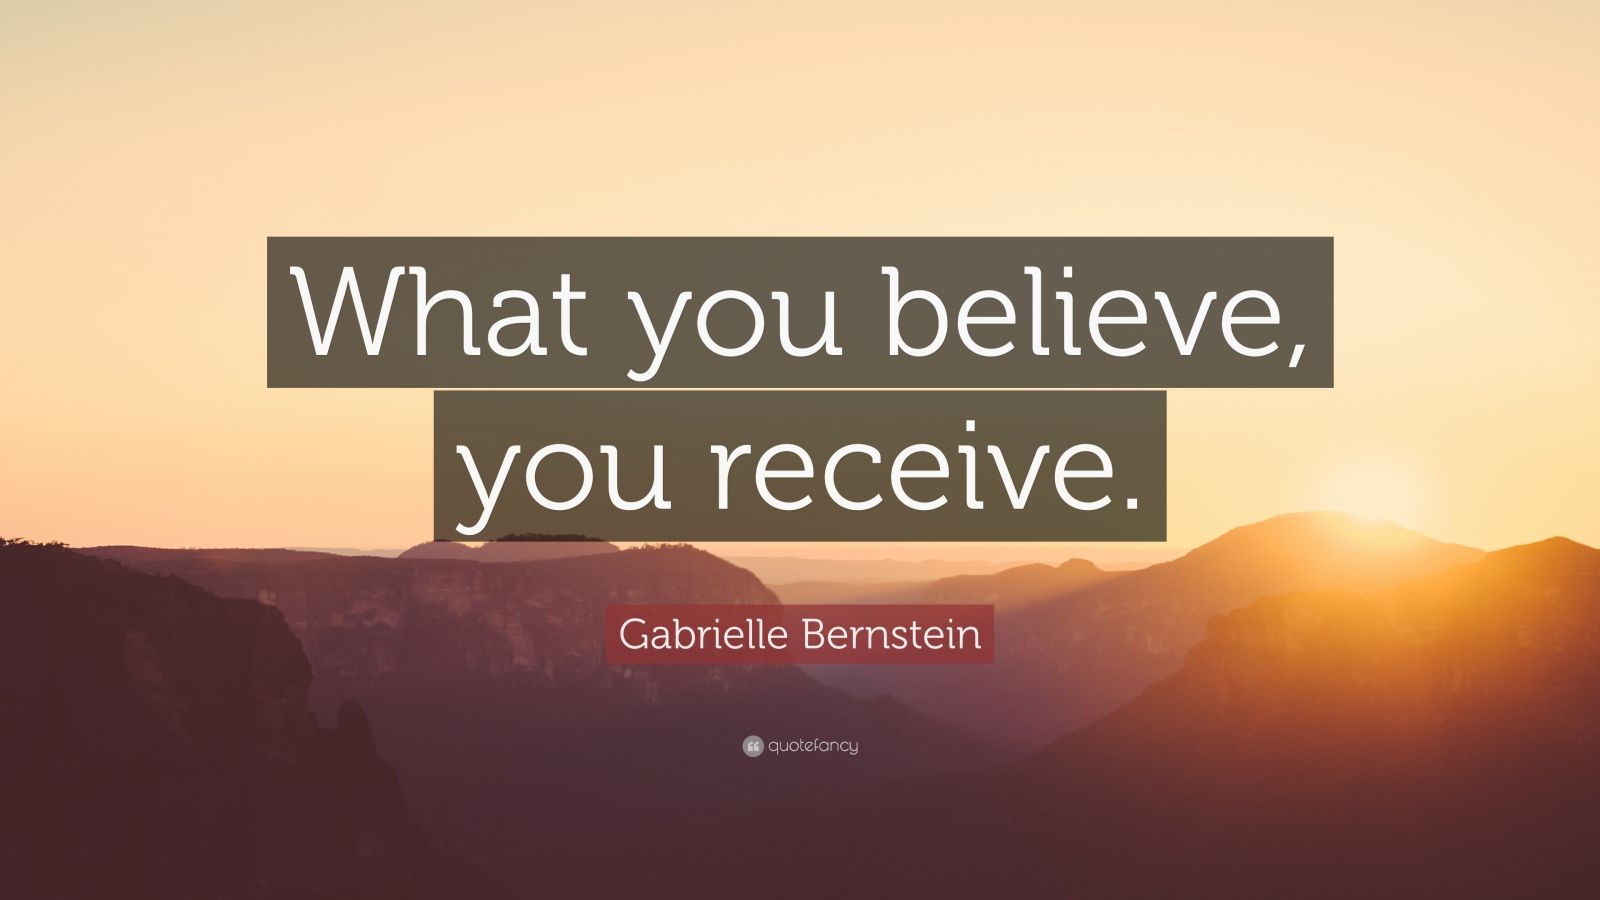 Top 80 Gabrielle Bernstein Quotes | 2021 Edition | Free Images - QuoteFancy